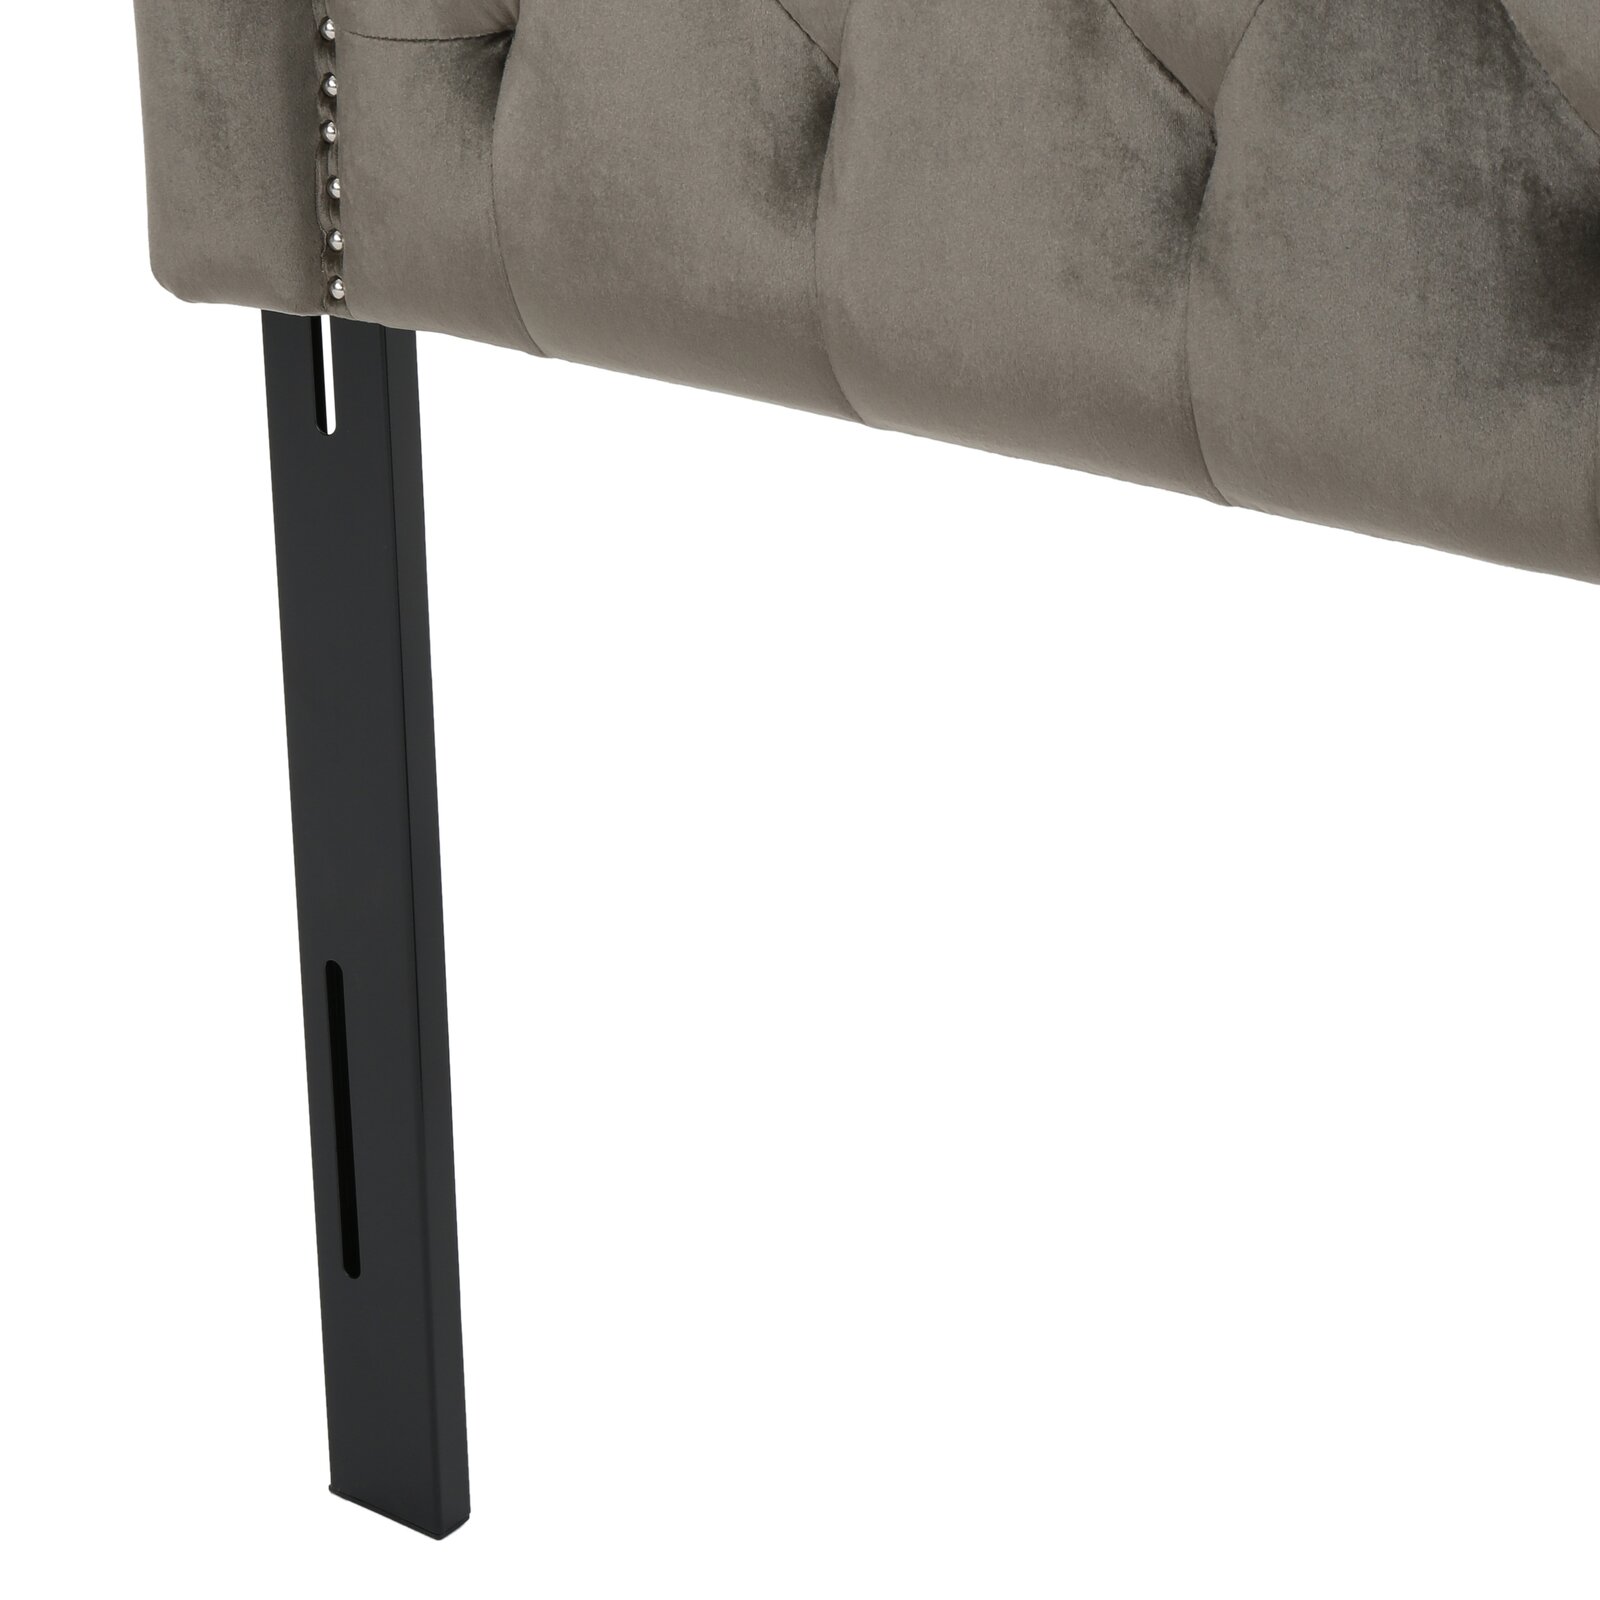 Pasko Full/Queen Panel Headboard, Frame Material: Metal, Upholstered: Yes - image 5 of 7